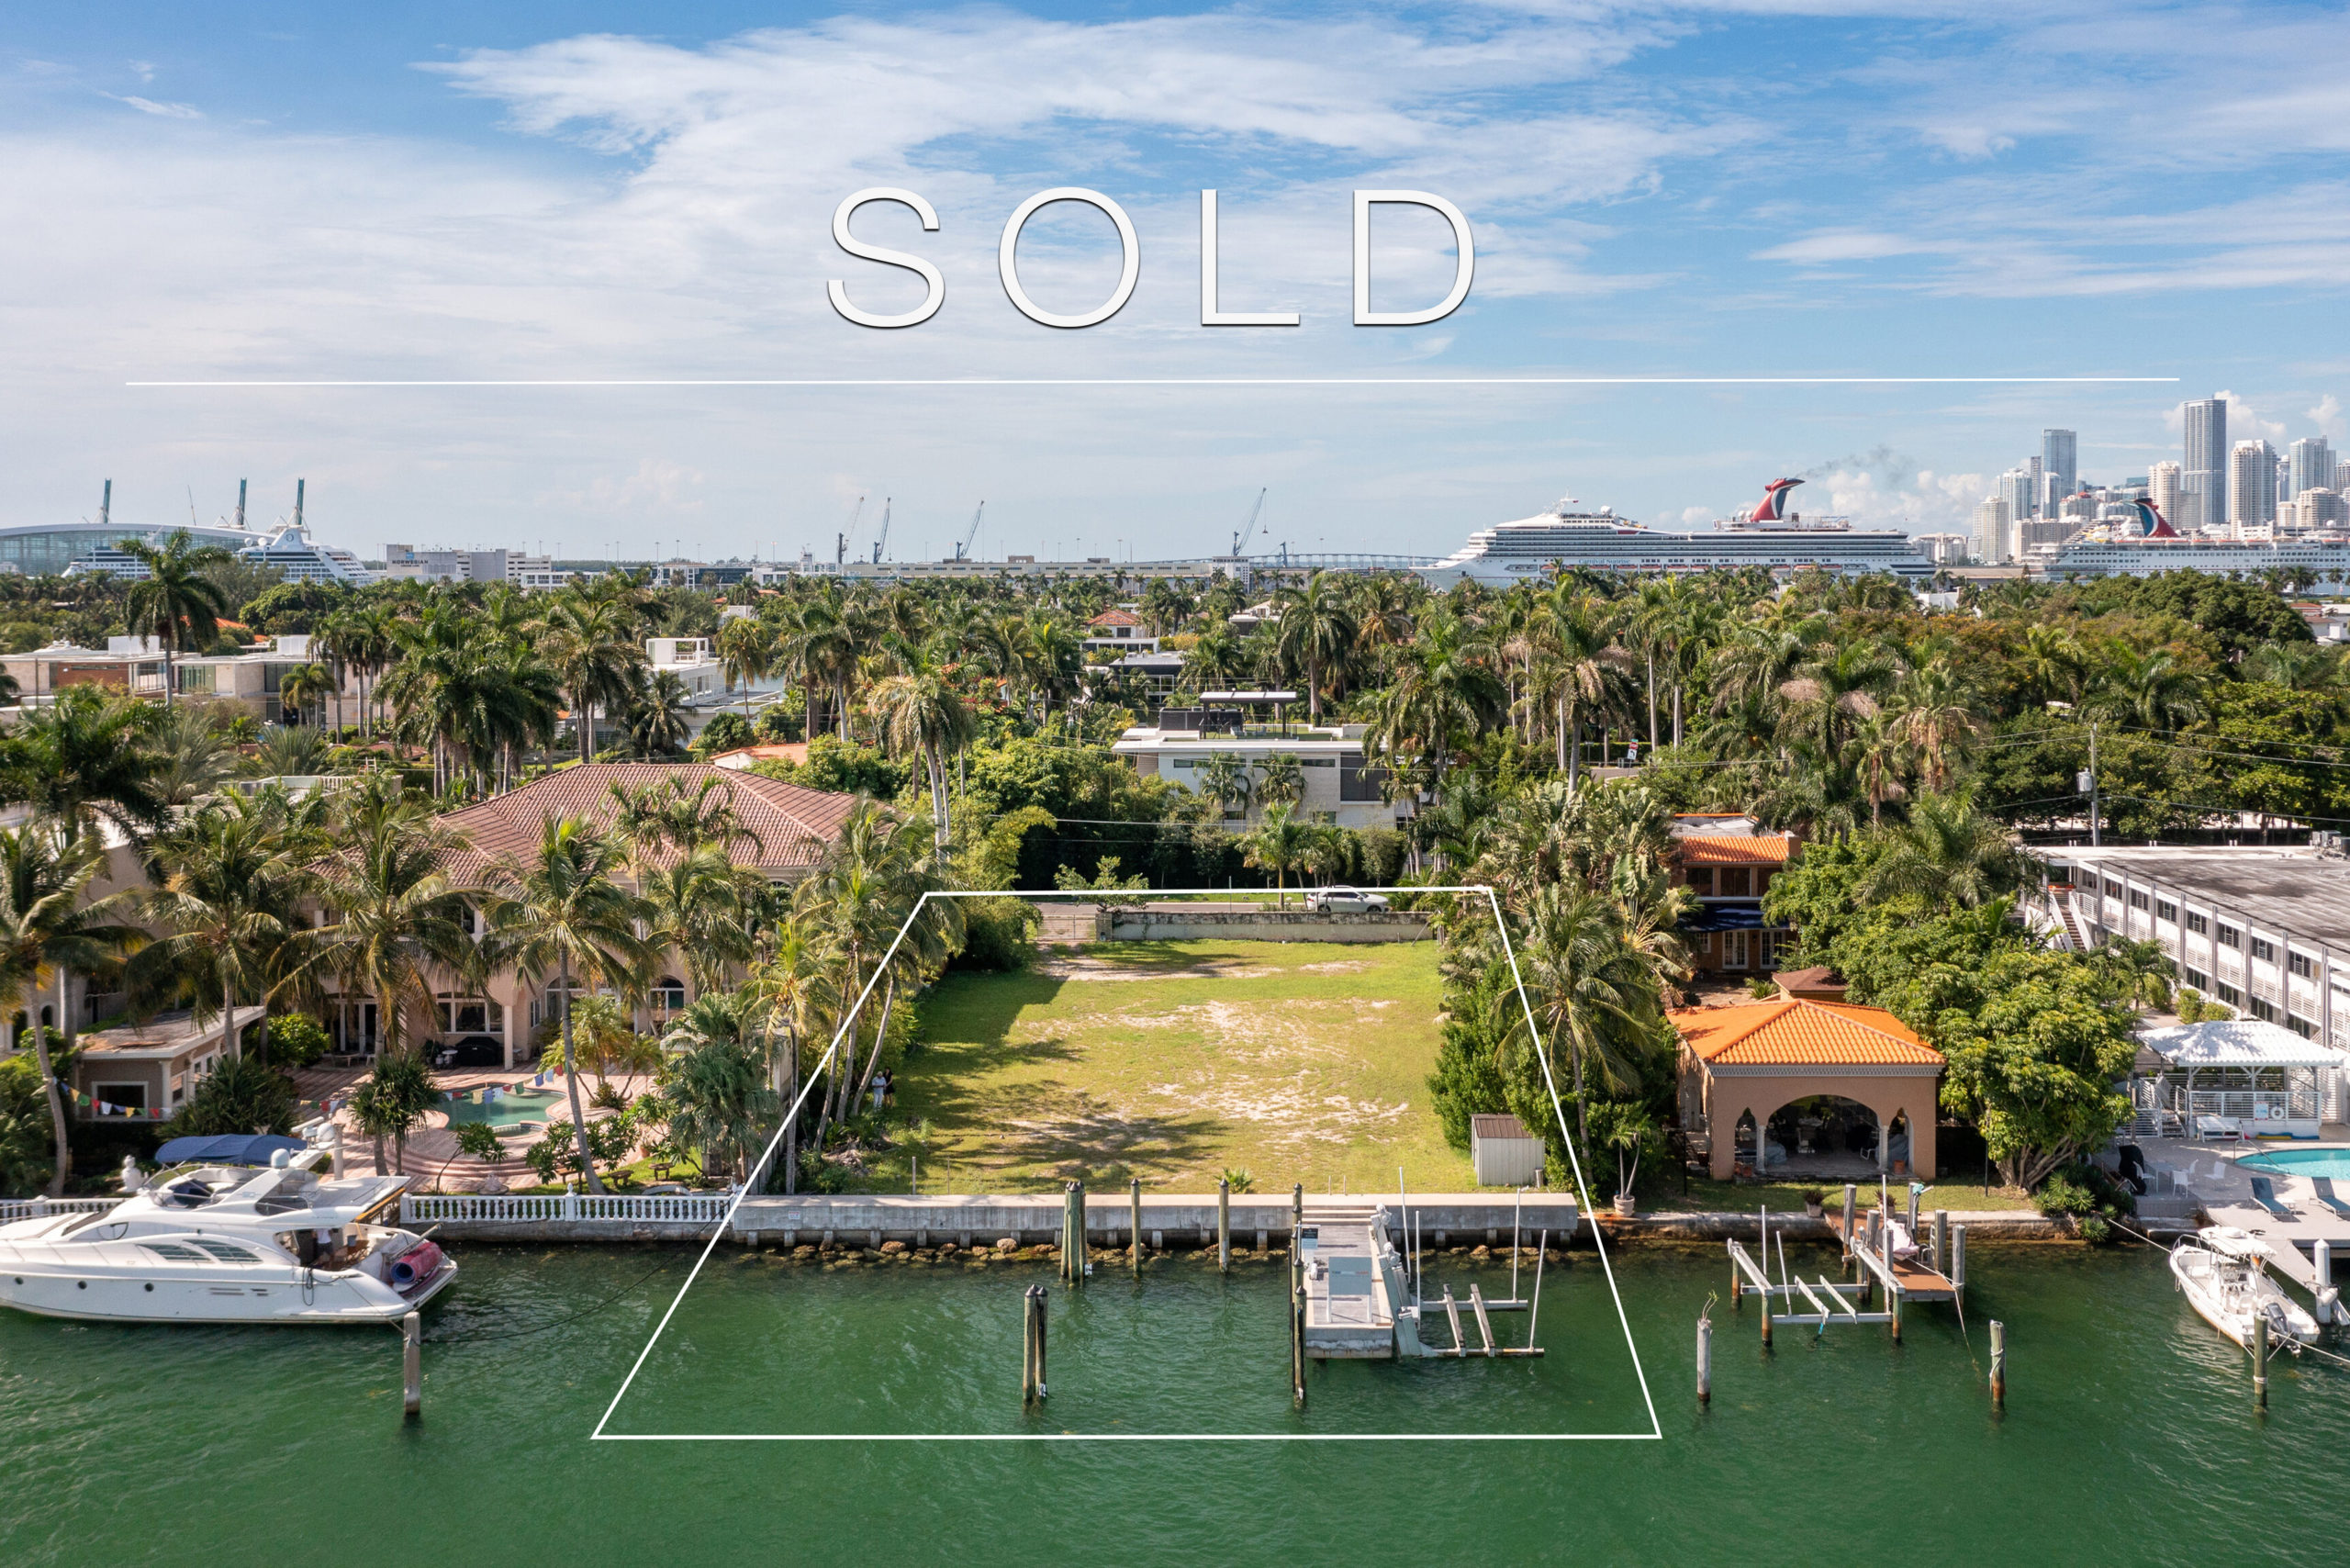 SOLD at $11,000,000 – Waterfront Lot on Hibiscus Island in Miami Beach